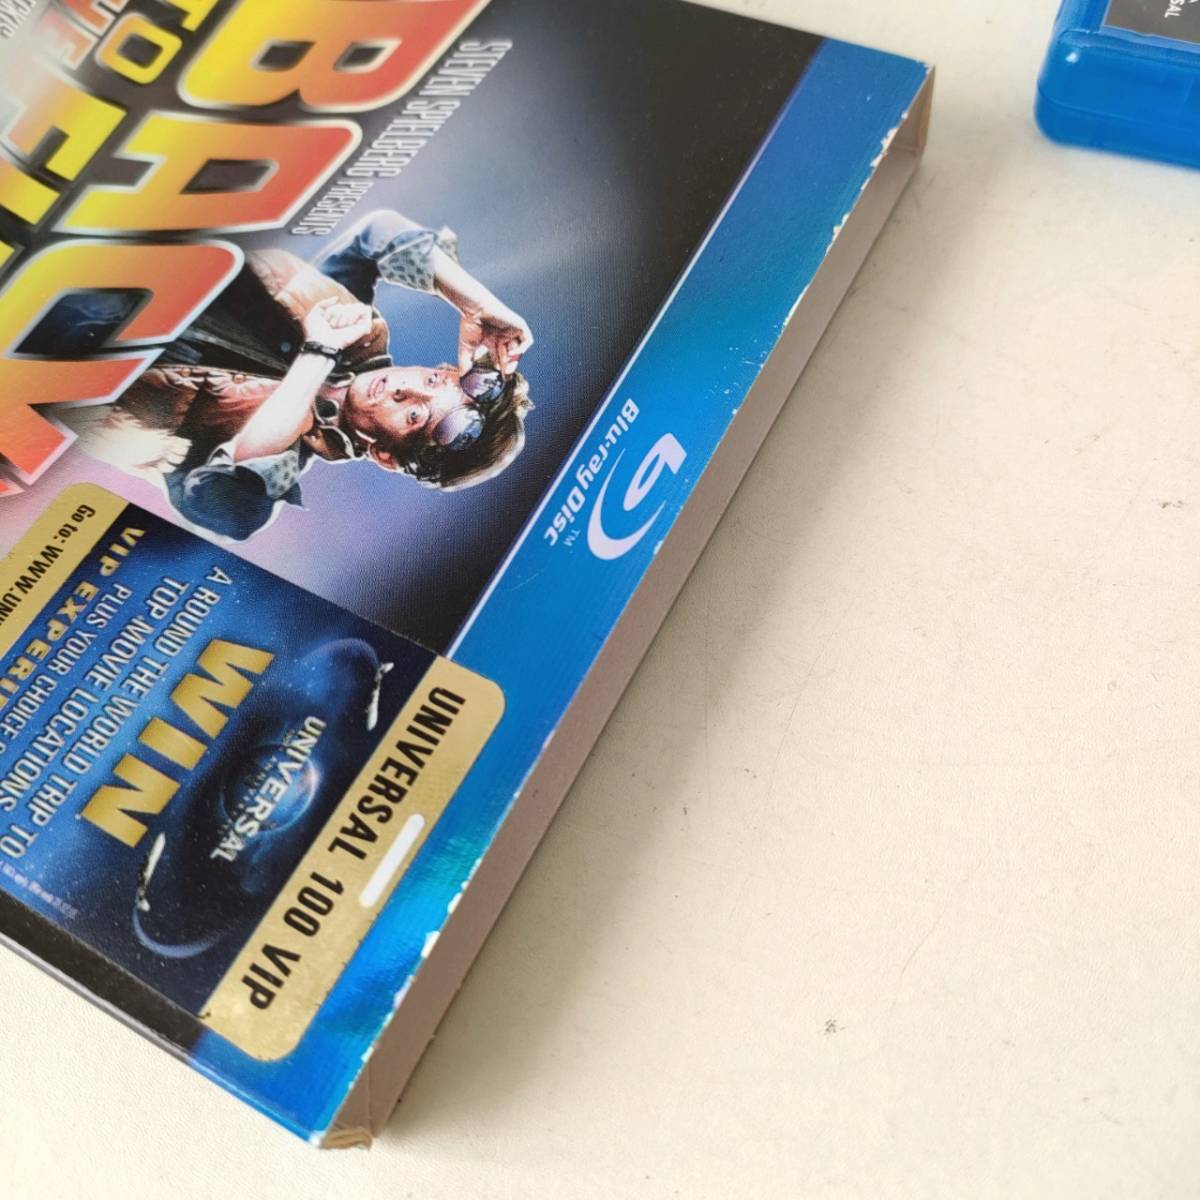 A01-4 洋画 Blu-ray BACK TO THE FUTURE TRILOGY 輸入盤 ブルーレイ バックトゥザフューチャー_画像6